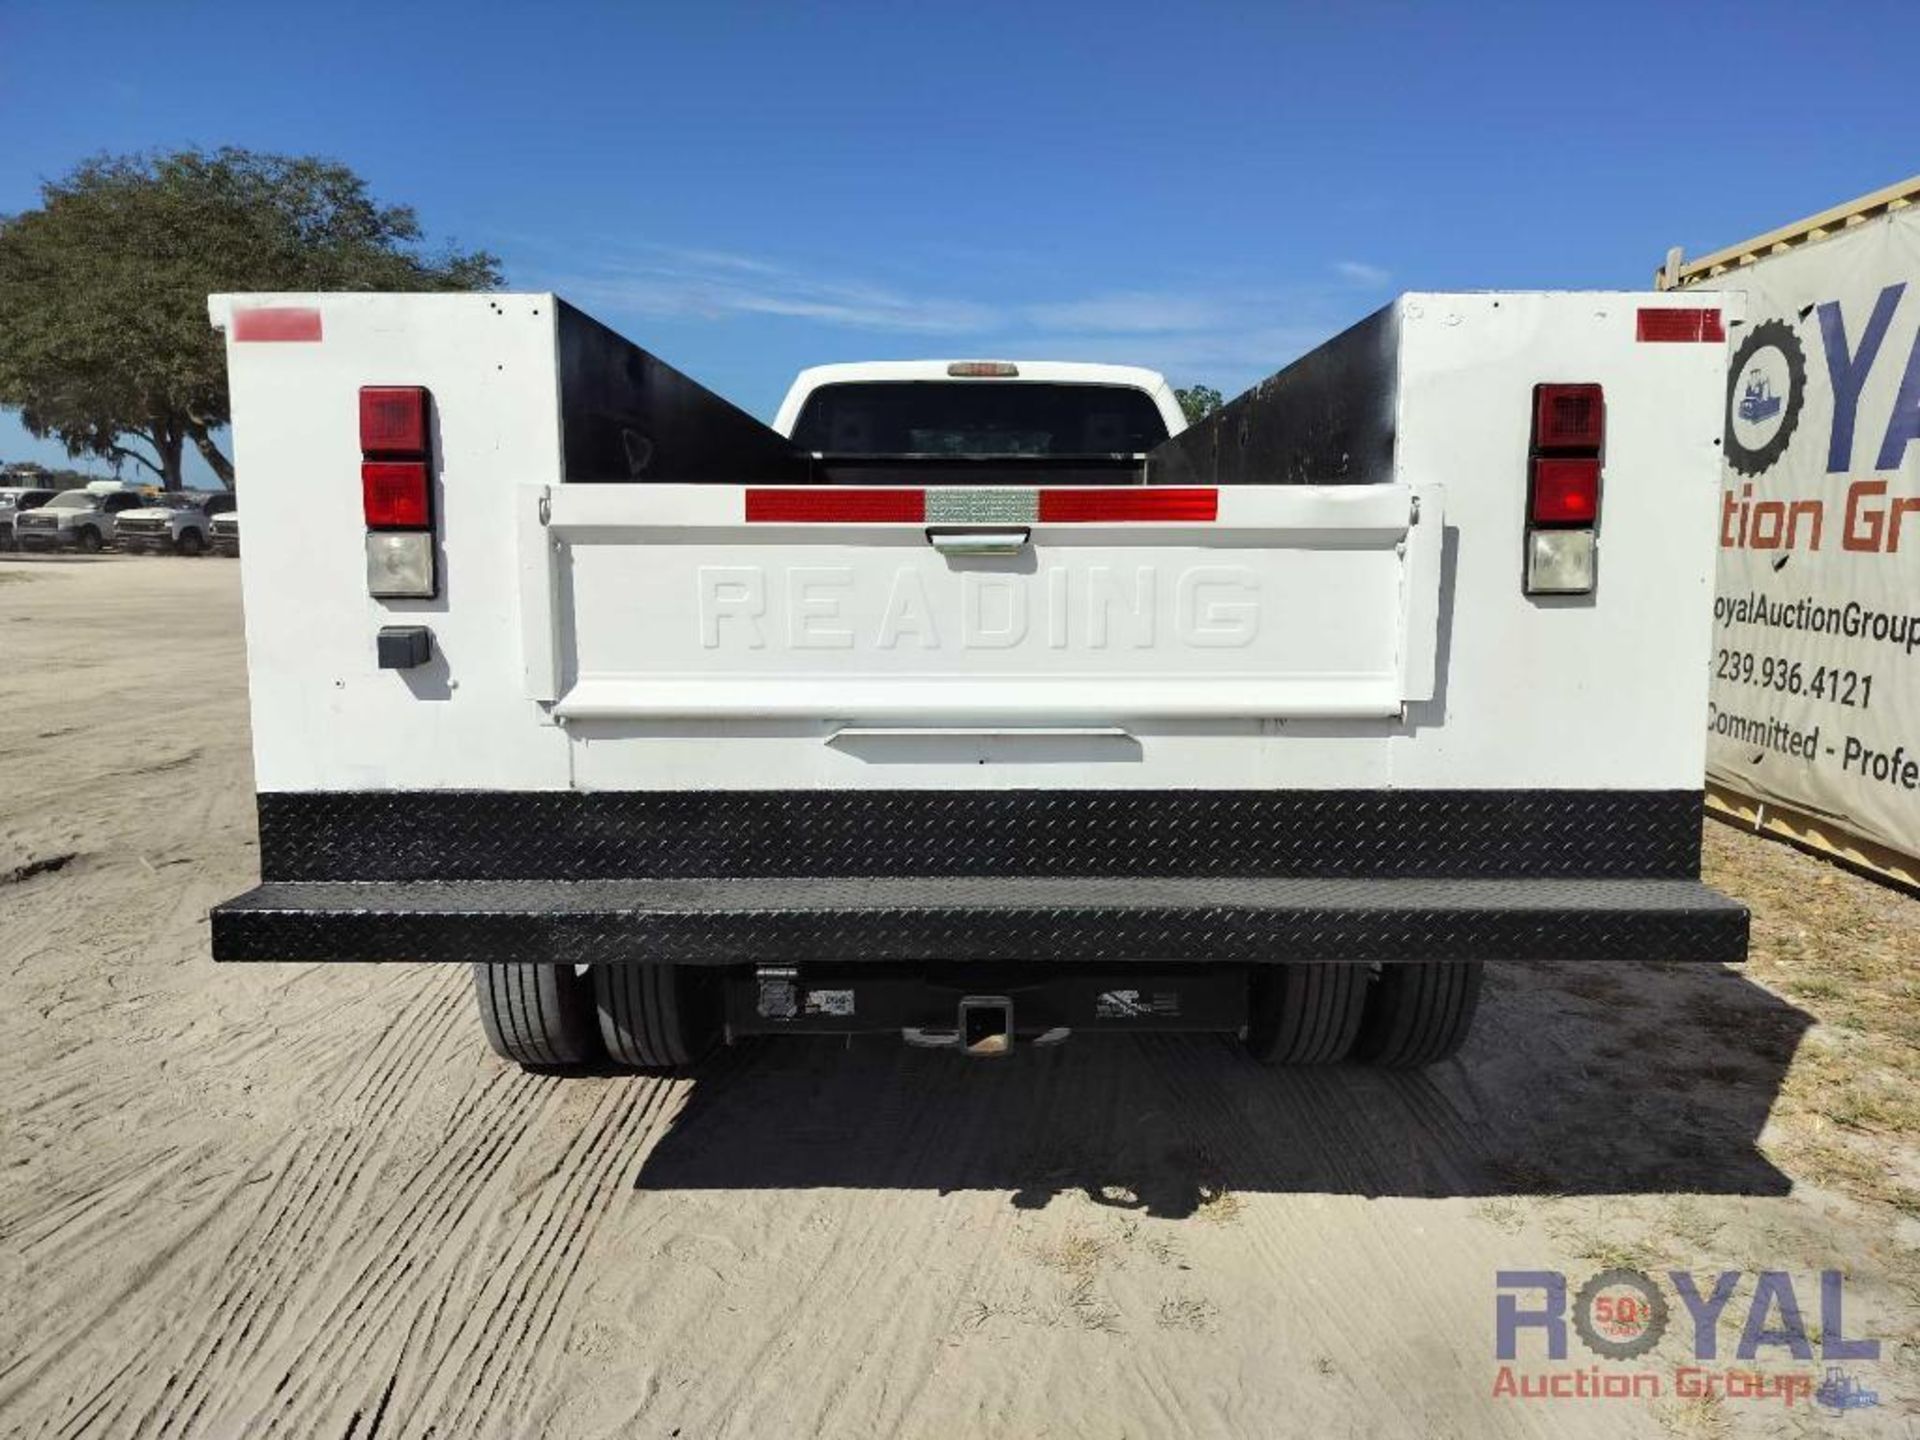 2012 Ford F550 Service Truck - Image 23 of 26